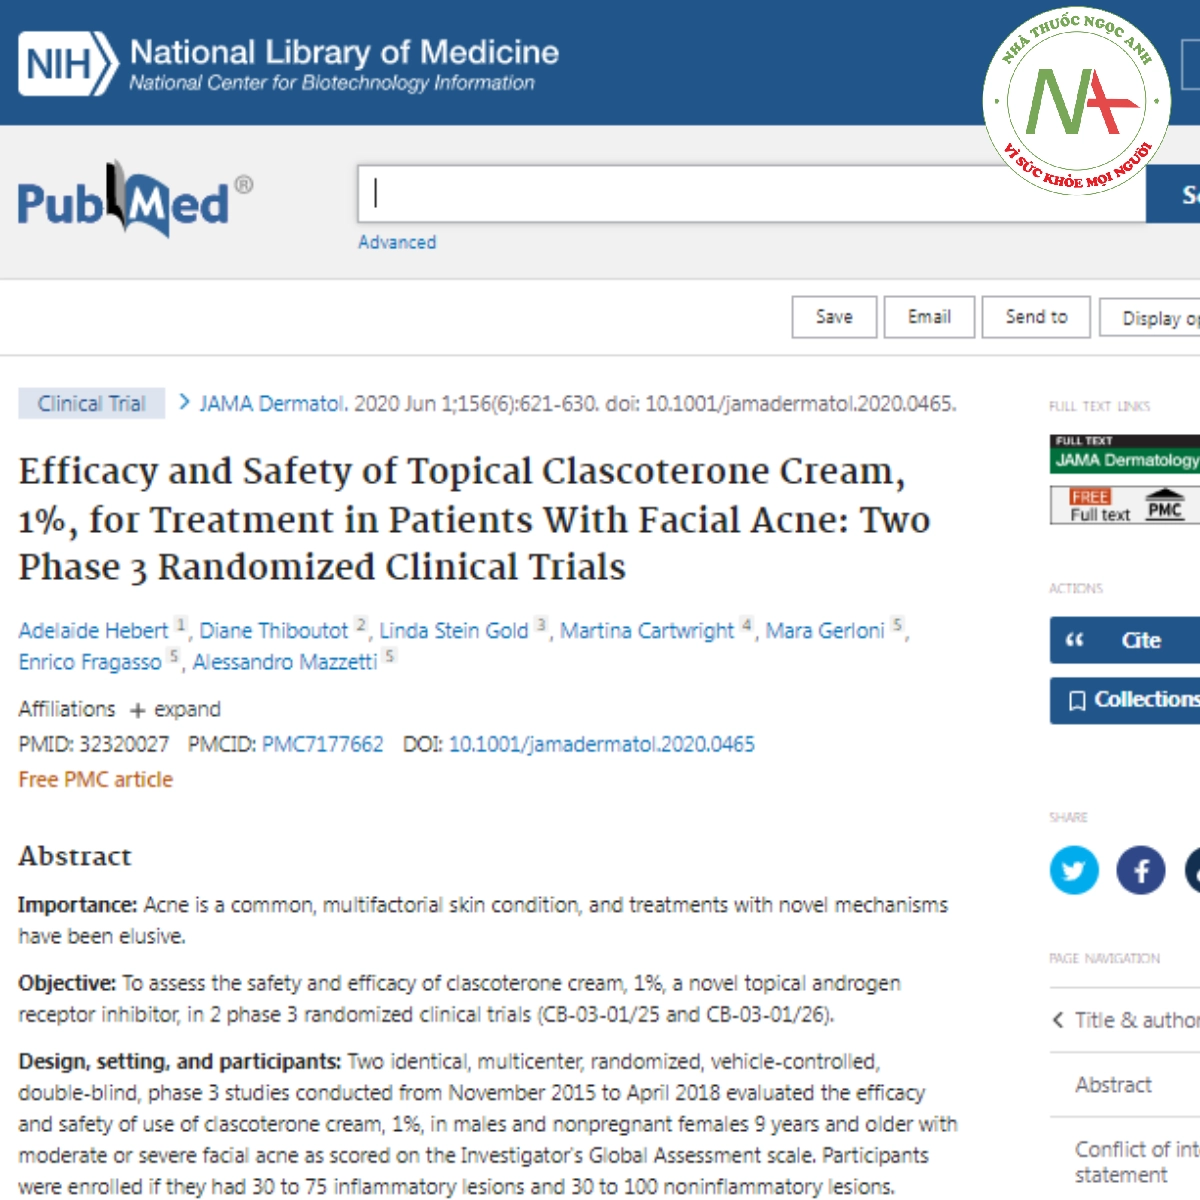 Efficacy and Safety of Topical Clascoterone Cream, 1%, for Treatment in Patients With Facial Acne_ Two Phase 3 Randomized Clinical Trials